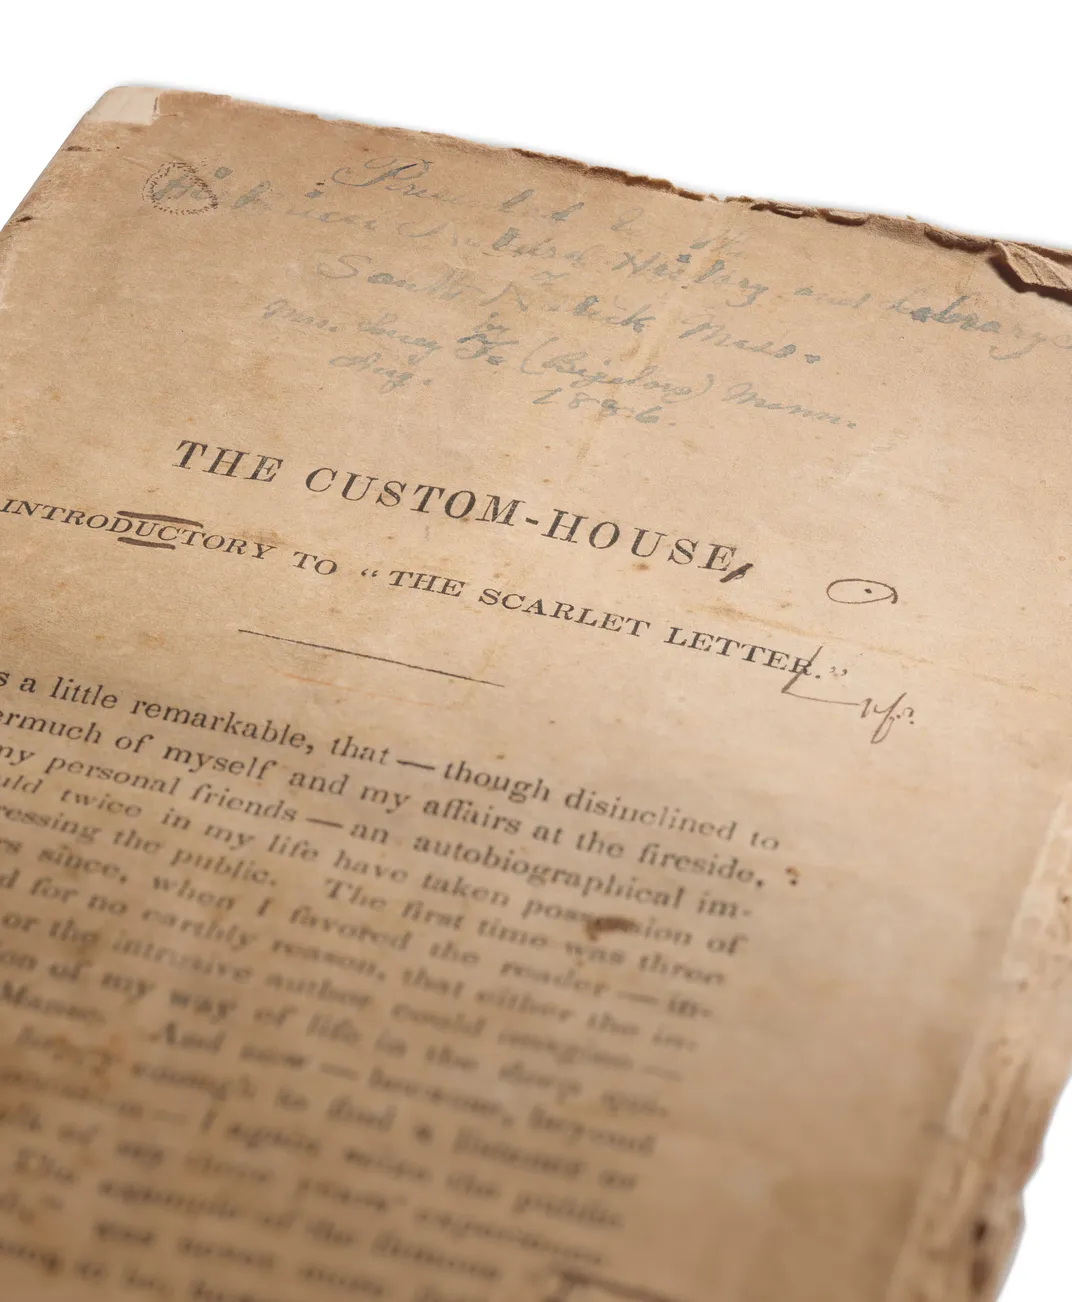 Hawthorne's annotated proof of The Scarlet Letter​​​​​​​